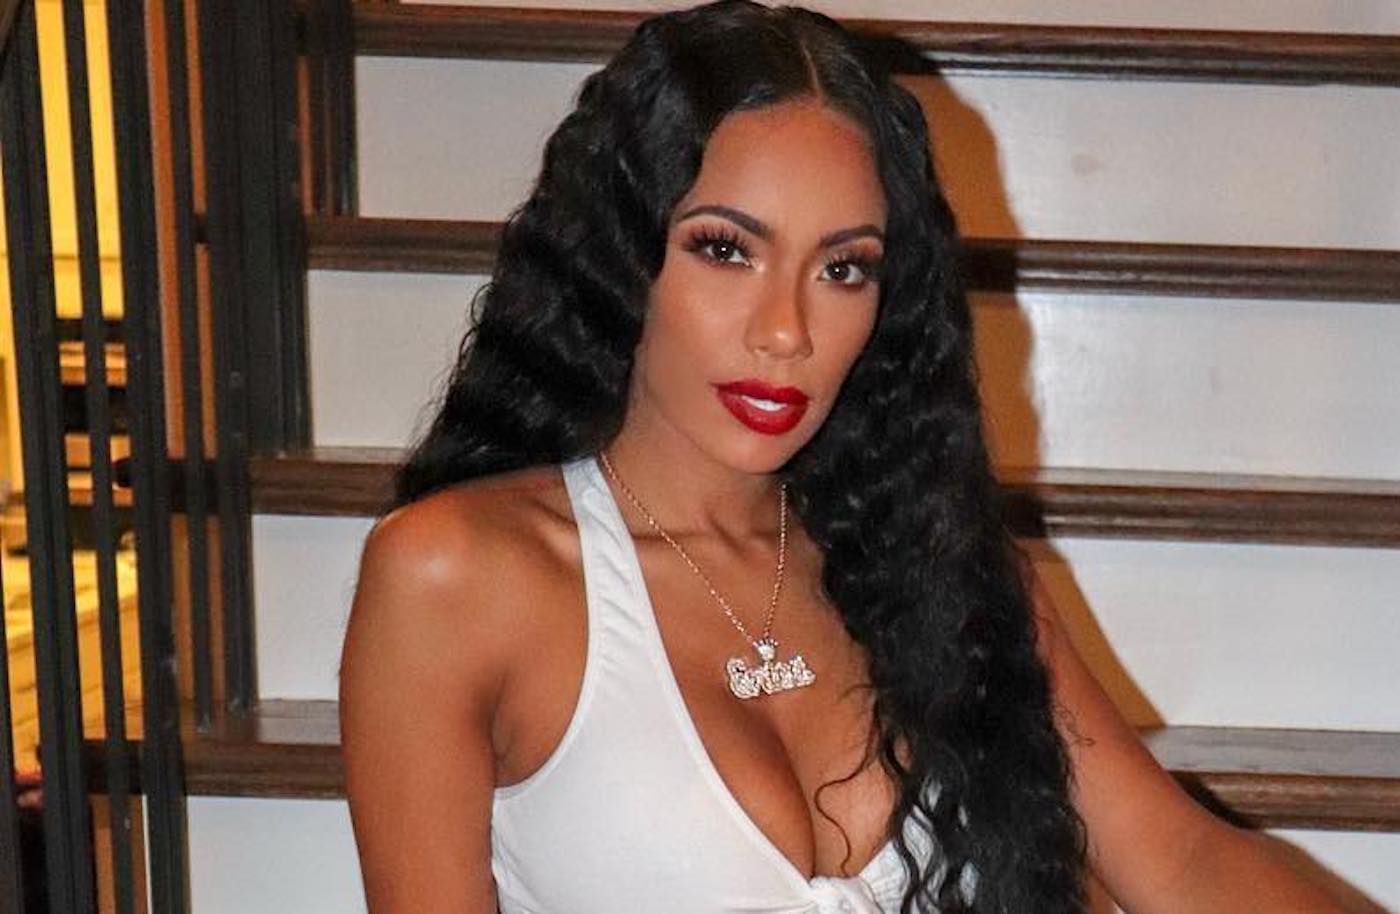 ”erica-mena-flaunts-her-best-assets-on-social-media-check-out-her-clip-here”